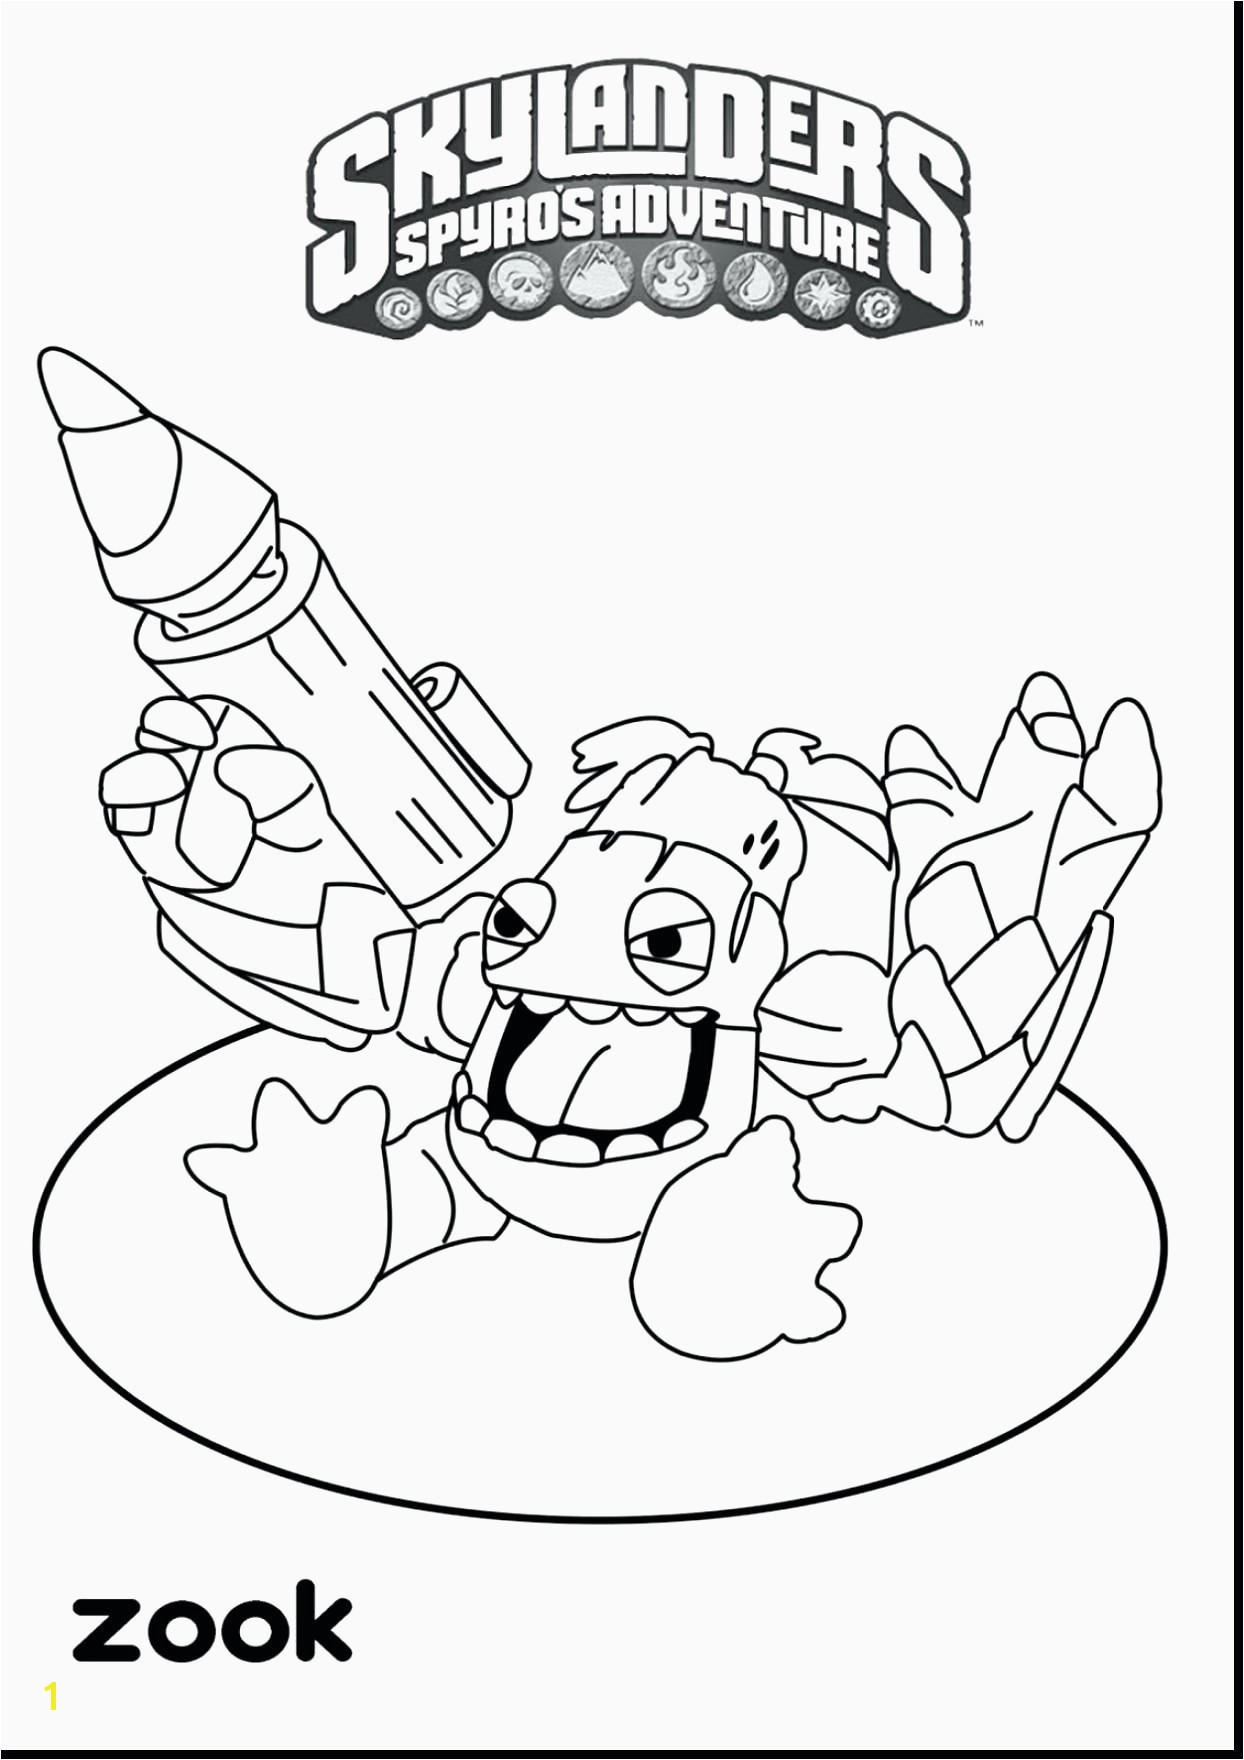 Cool Coloring Page Inspirational Witch Coloring Pages New Crayola Pages 0d Coloring Page Crayola Printable